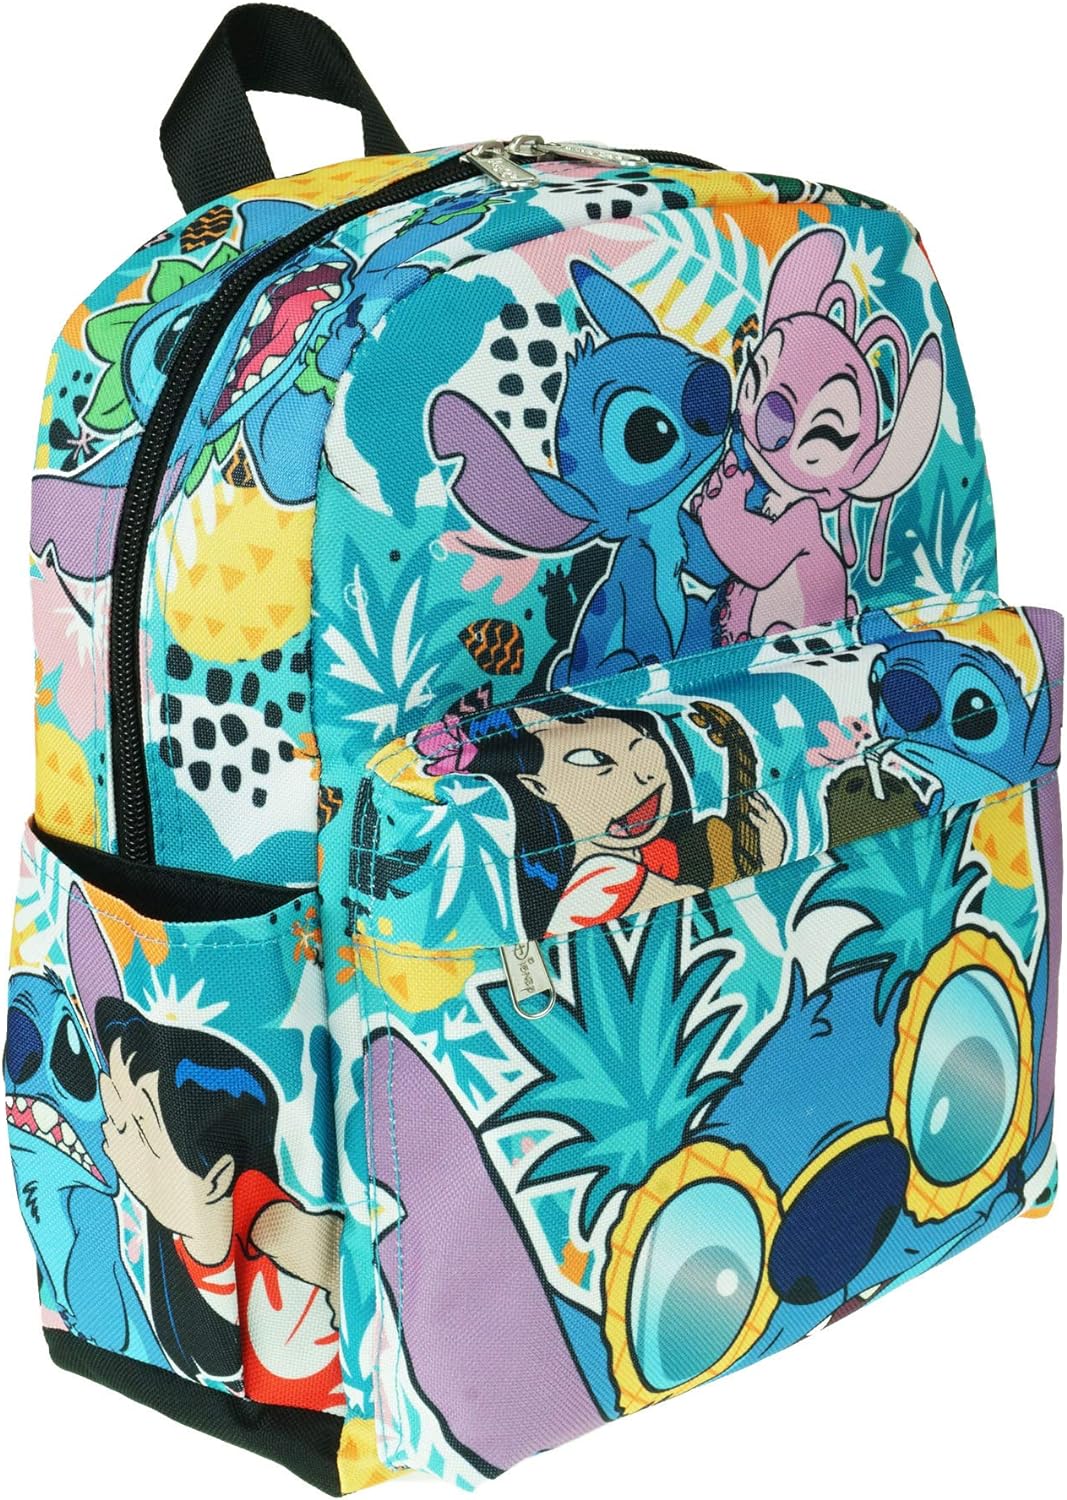 Lilo & Stitch 12-inch Deluxe Print Backpack- A21273